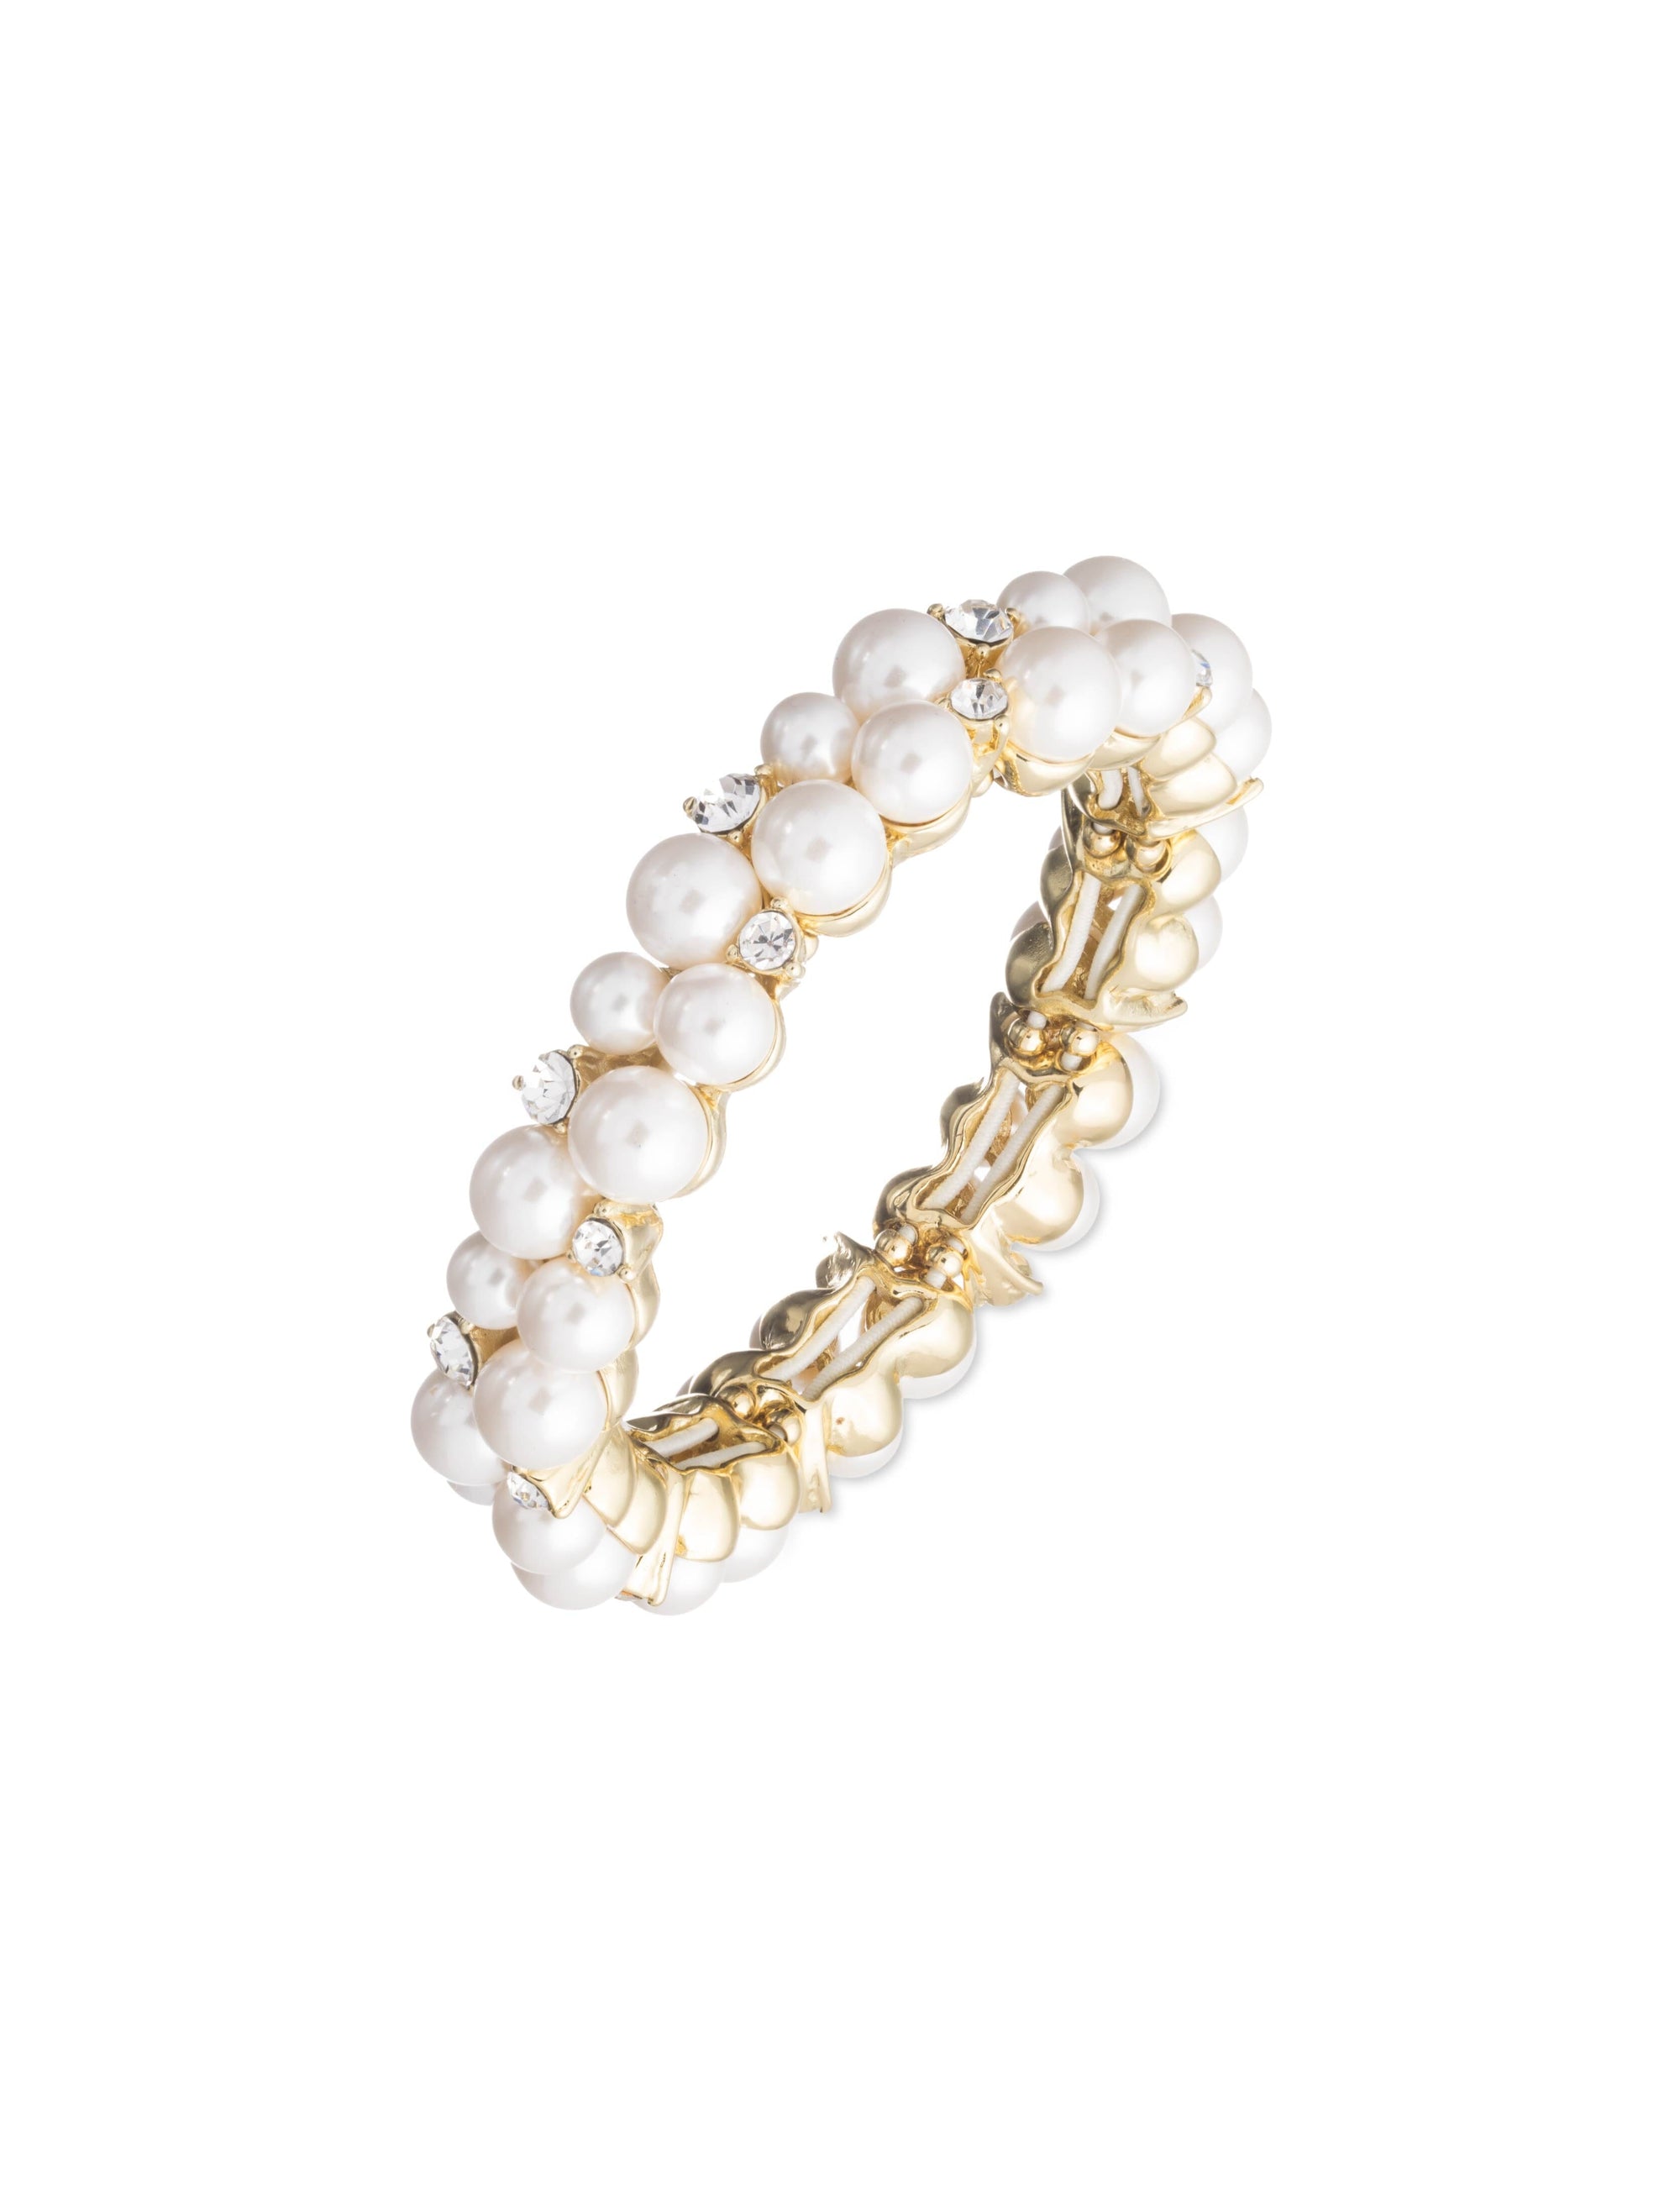 Anne Klein Gold-Tone Clustered Faux Pearl and Crystal Stretch Bracelet